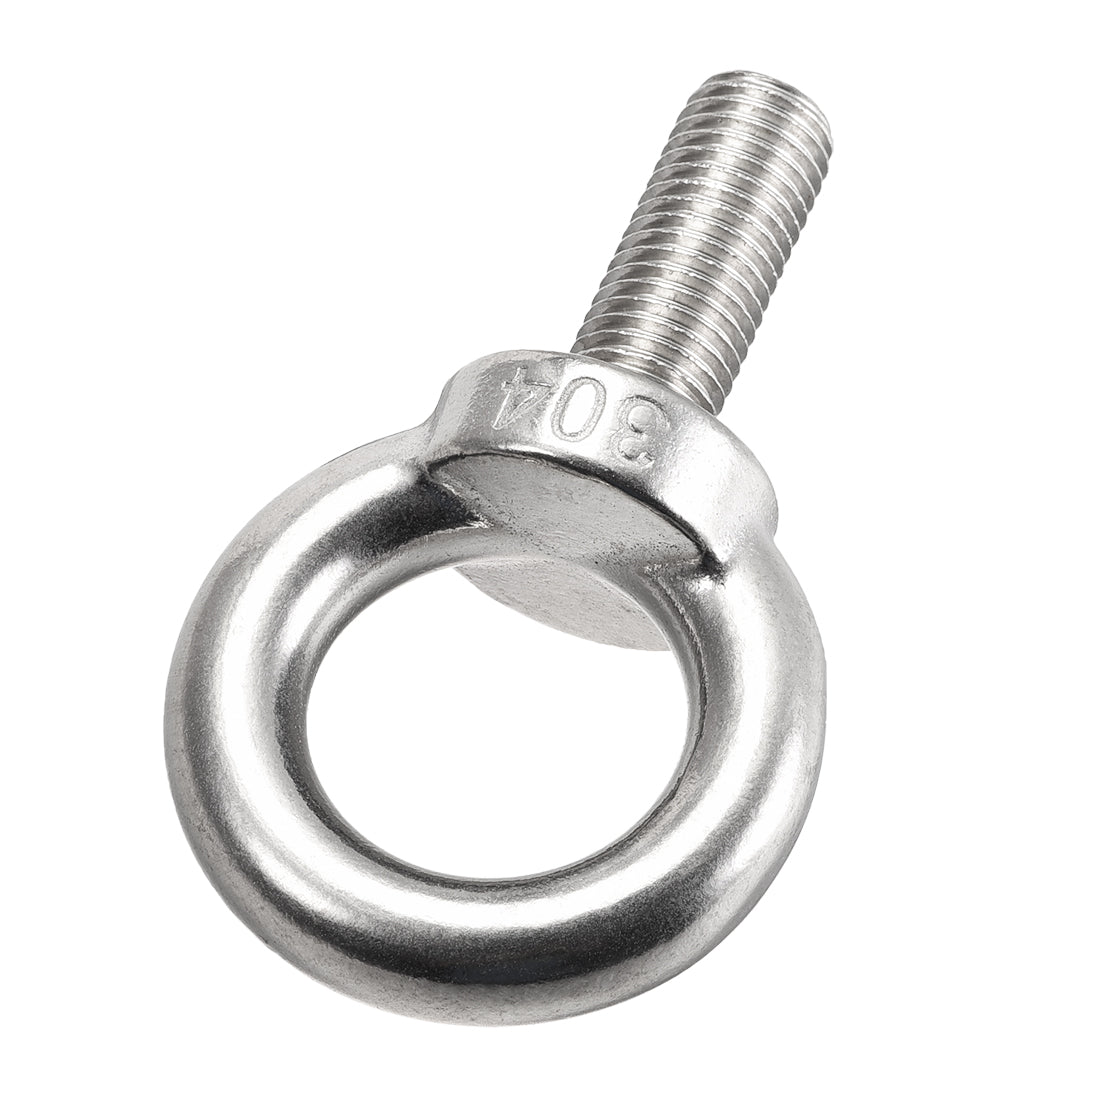 uxcell Uxcell 2 Pcs M16x40mm Thread 35mm Inside Dia 61mm Outside Dia 304 Stainless Steel Lifting Eye Bolt